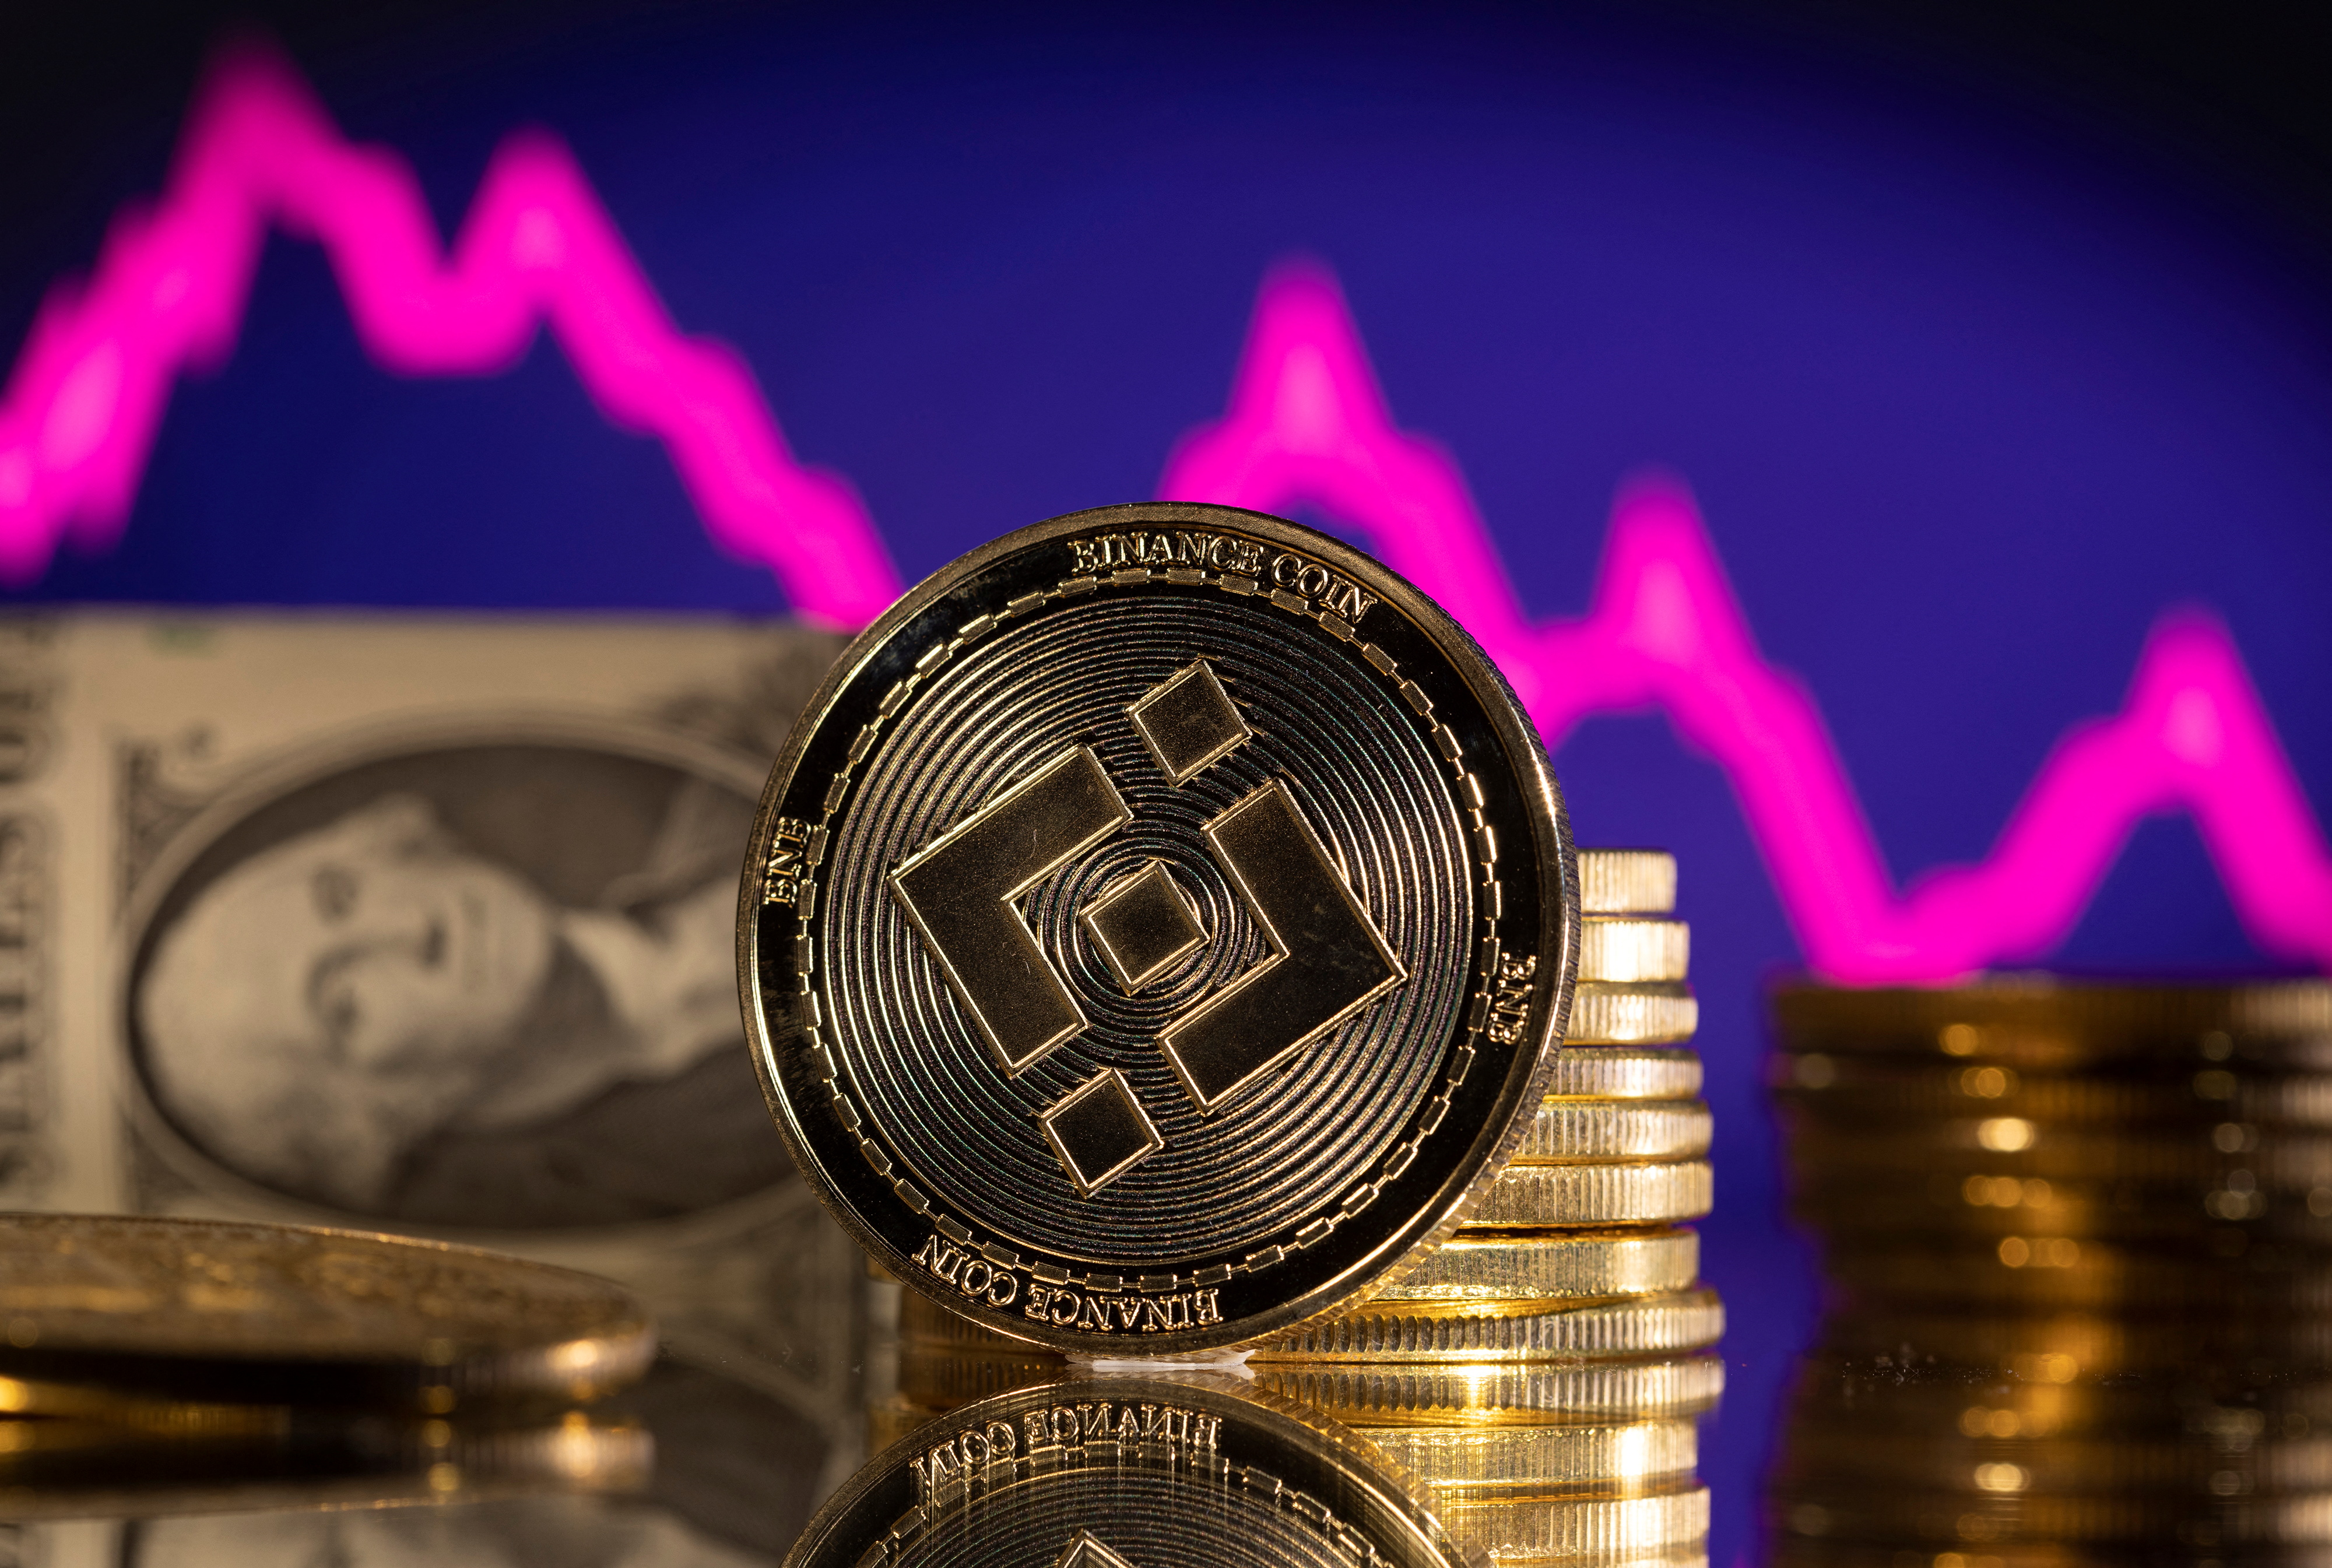 FILE PHOTO - Illustration shows representations of cryptocurrency Binance Coin